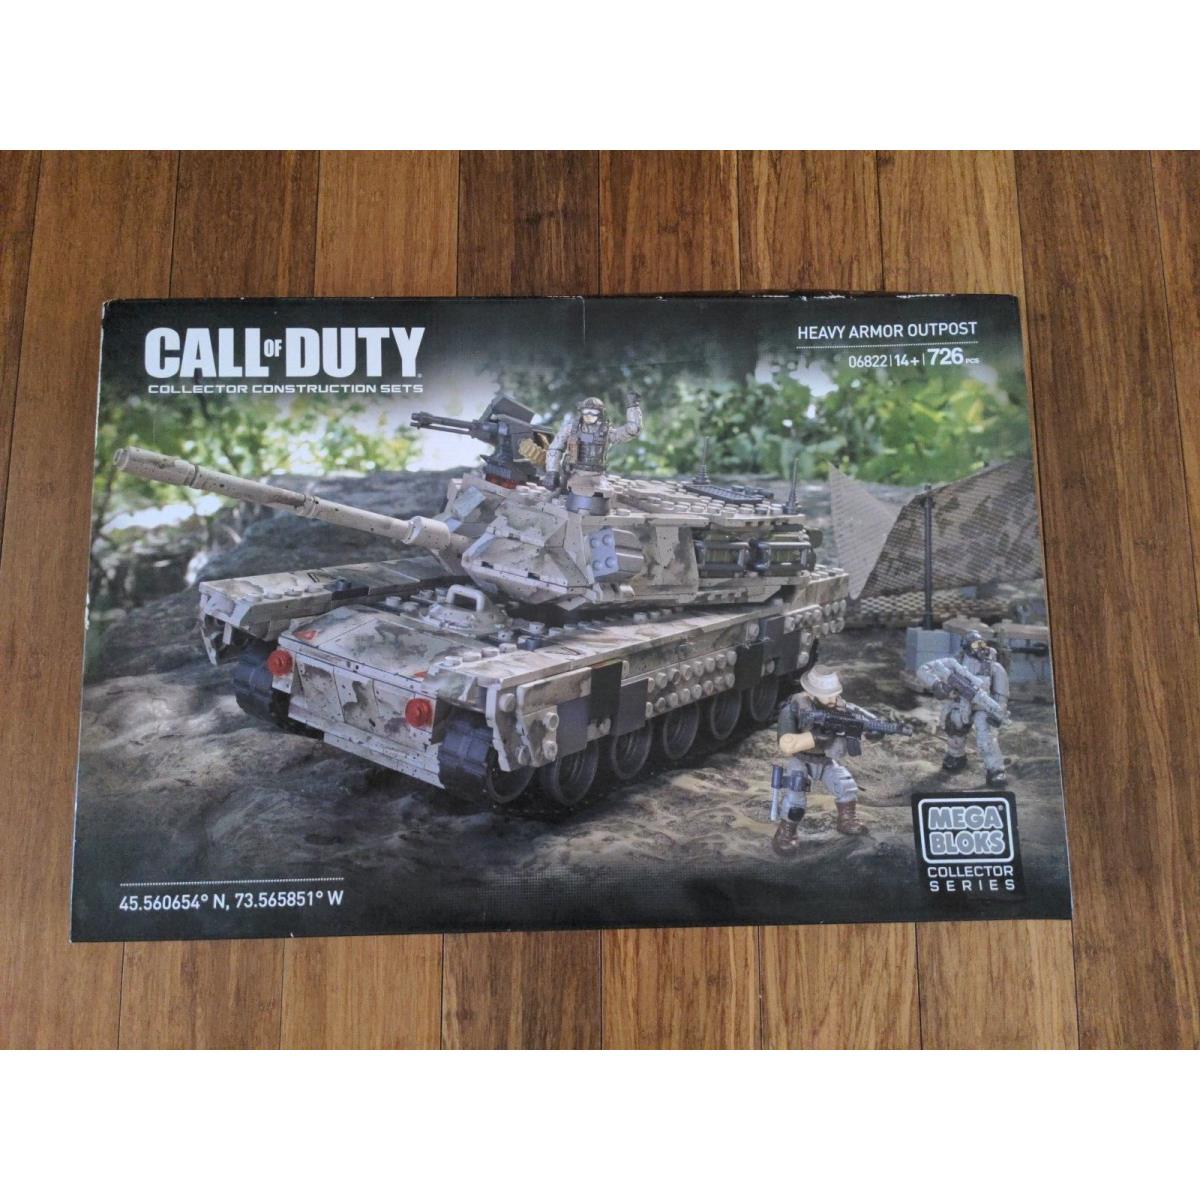 Mega Bloks Call Of Duty Heavy Armor Outpost 06822 Never Opened 726 Pieces Rare